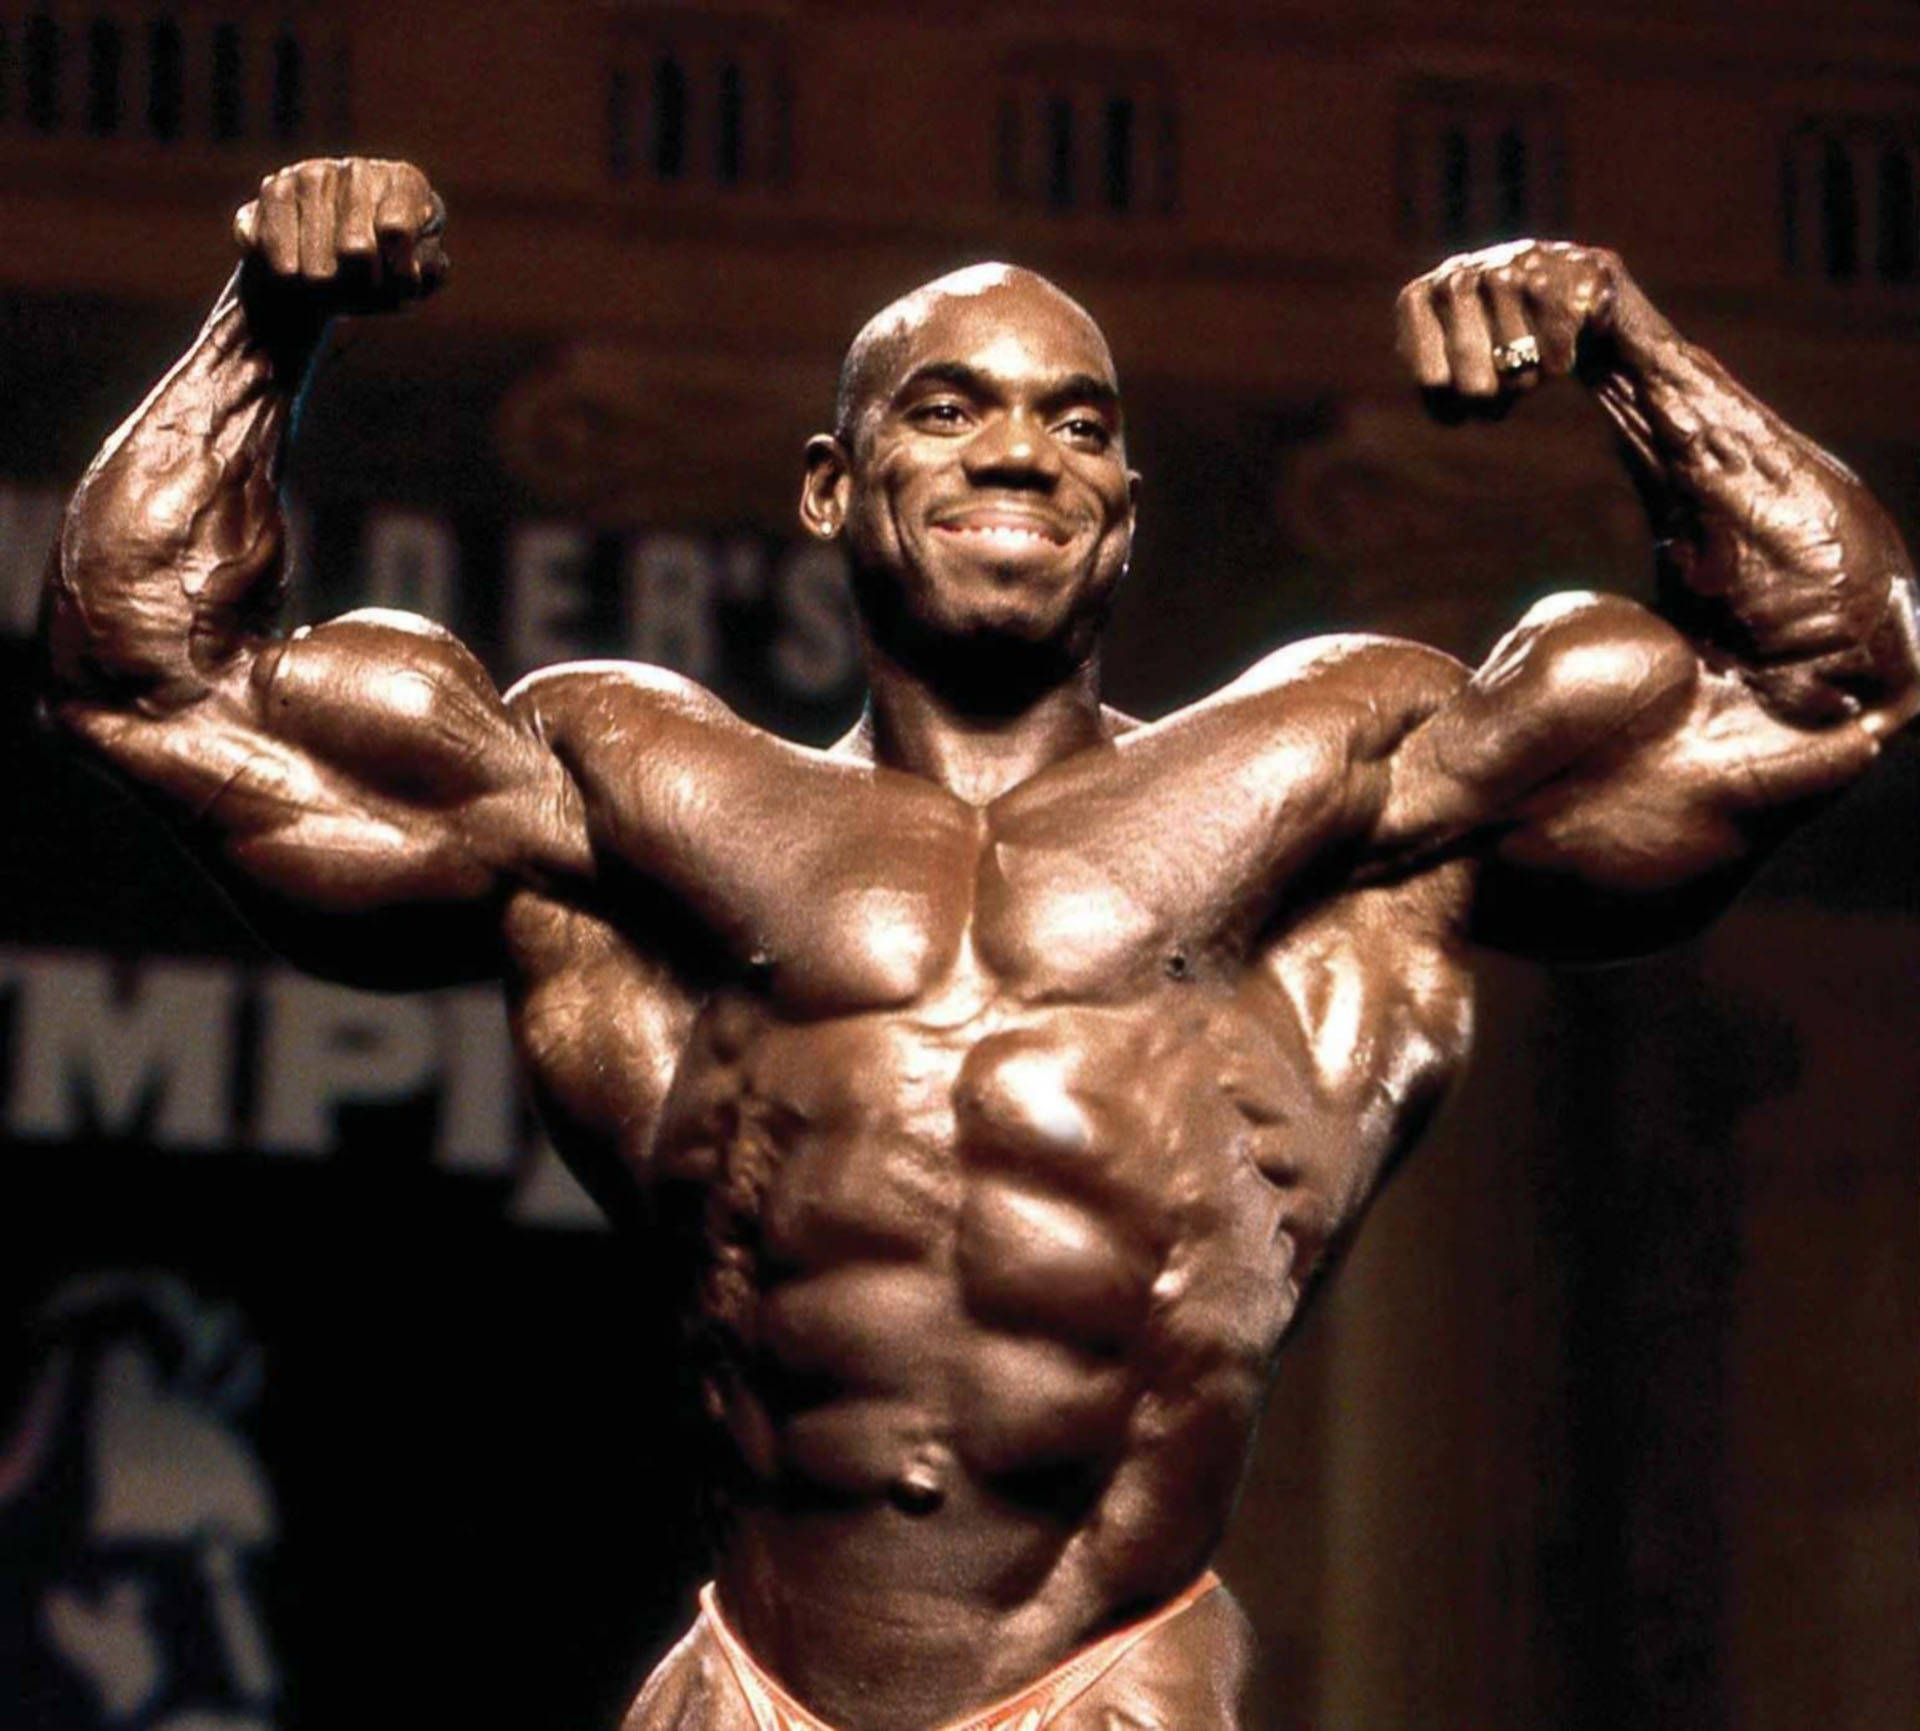 Huskyflex Wheeler Is A Bodybuilder Known For His Impressive Physique And Incredible Strength. Some People Might Consider Him A True Inspiration When It Comes To Fitness And Working Out. His Dedication And Hard Work Have Allowed Him To Achieve Great Success In The Bodybuilding Industry. Fondo de pantalla